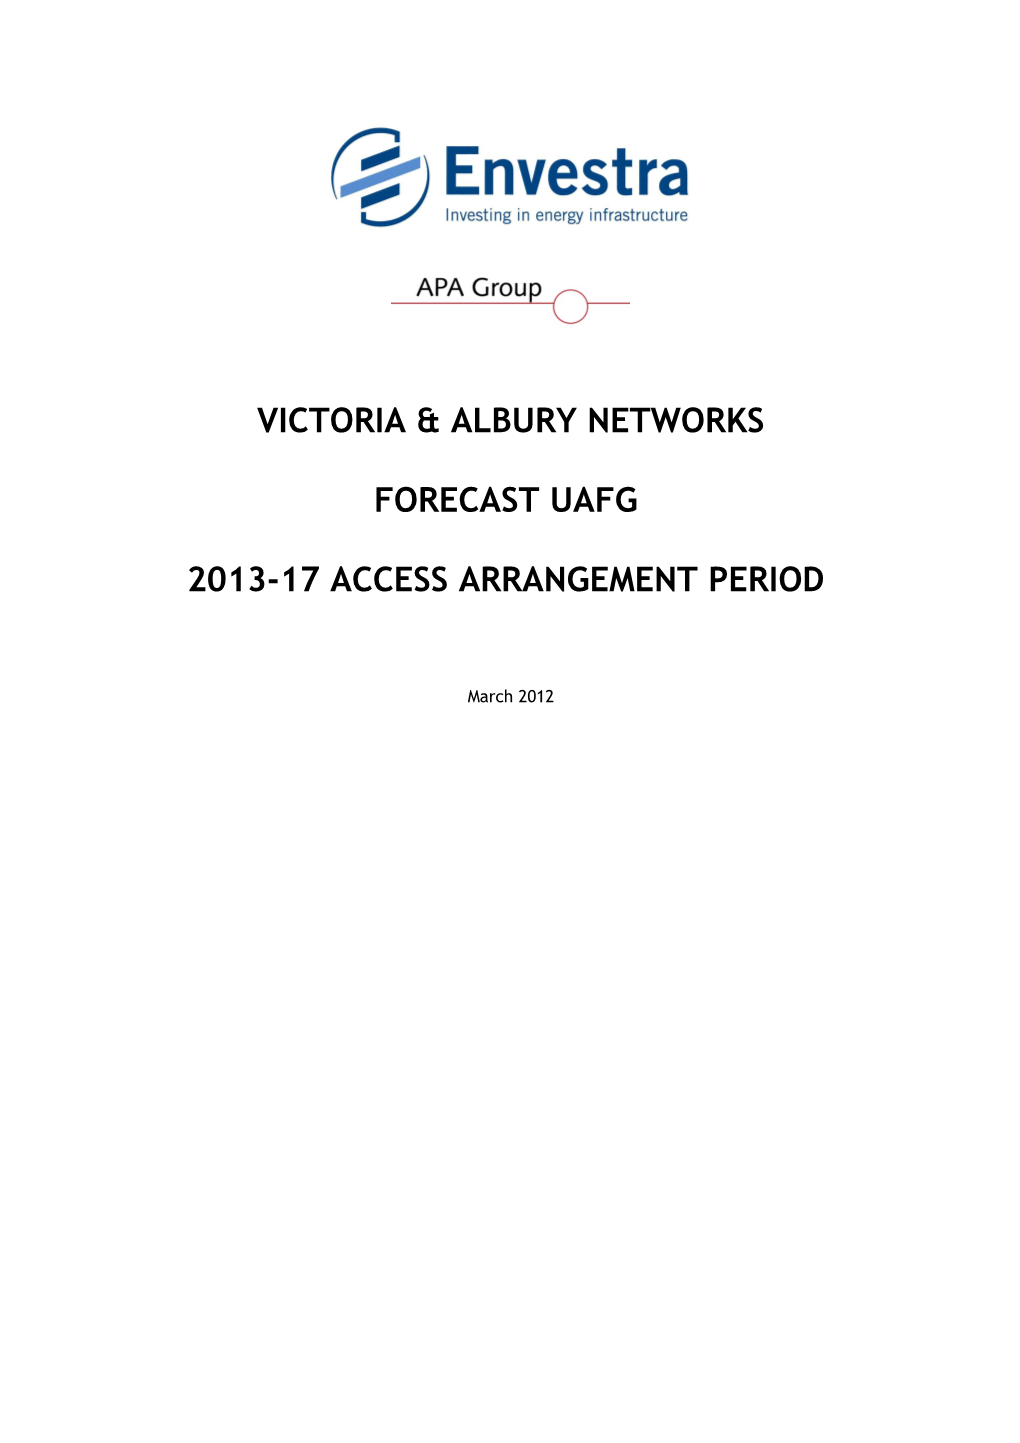 Victoria Mains Replacement Plan - 2013 2018 AA